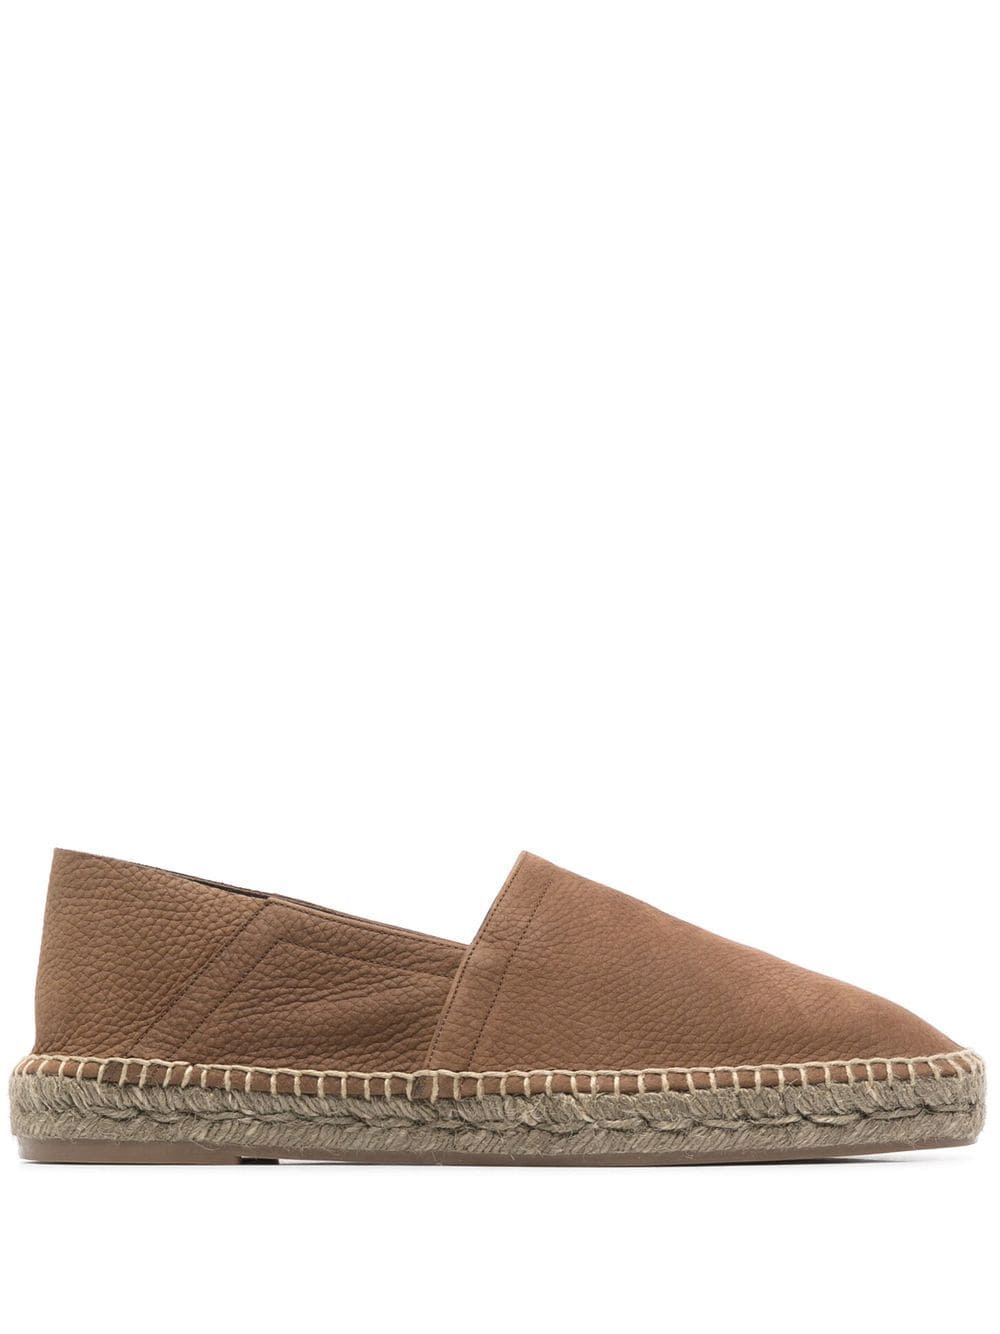 TOM FORD grained leather espadrilles - Brown von TOM FORD